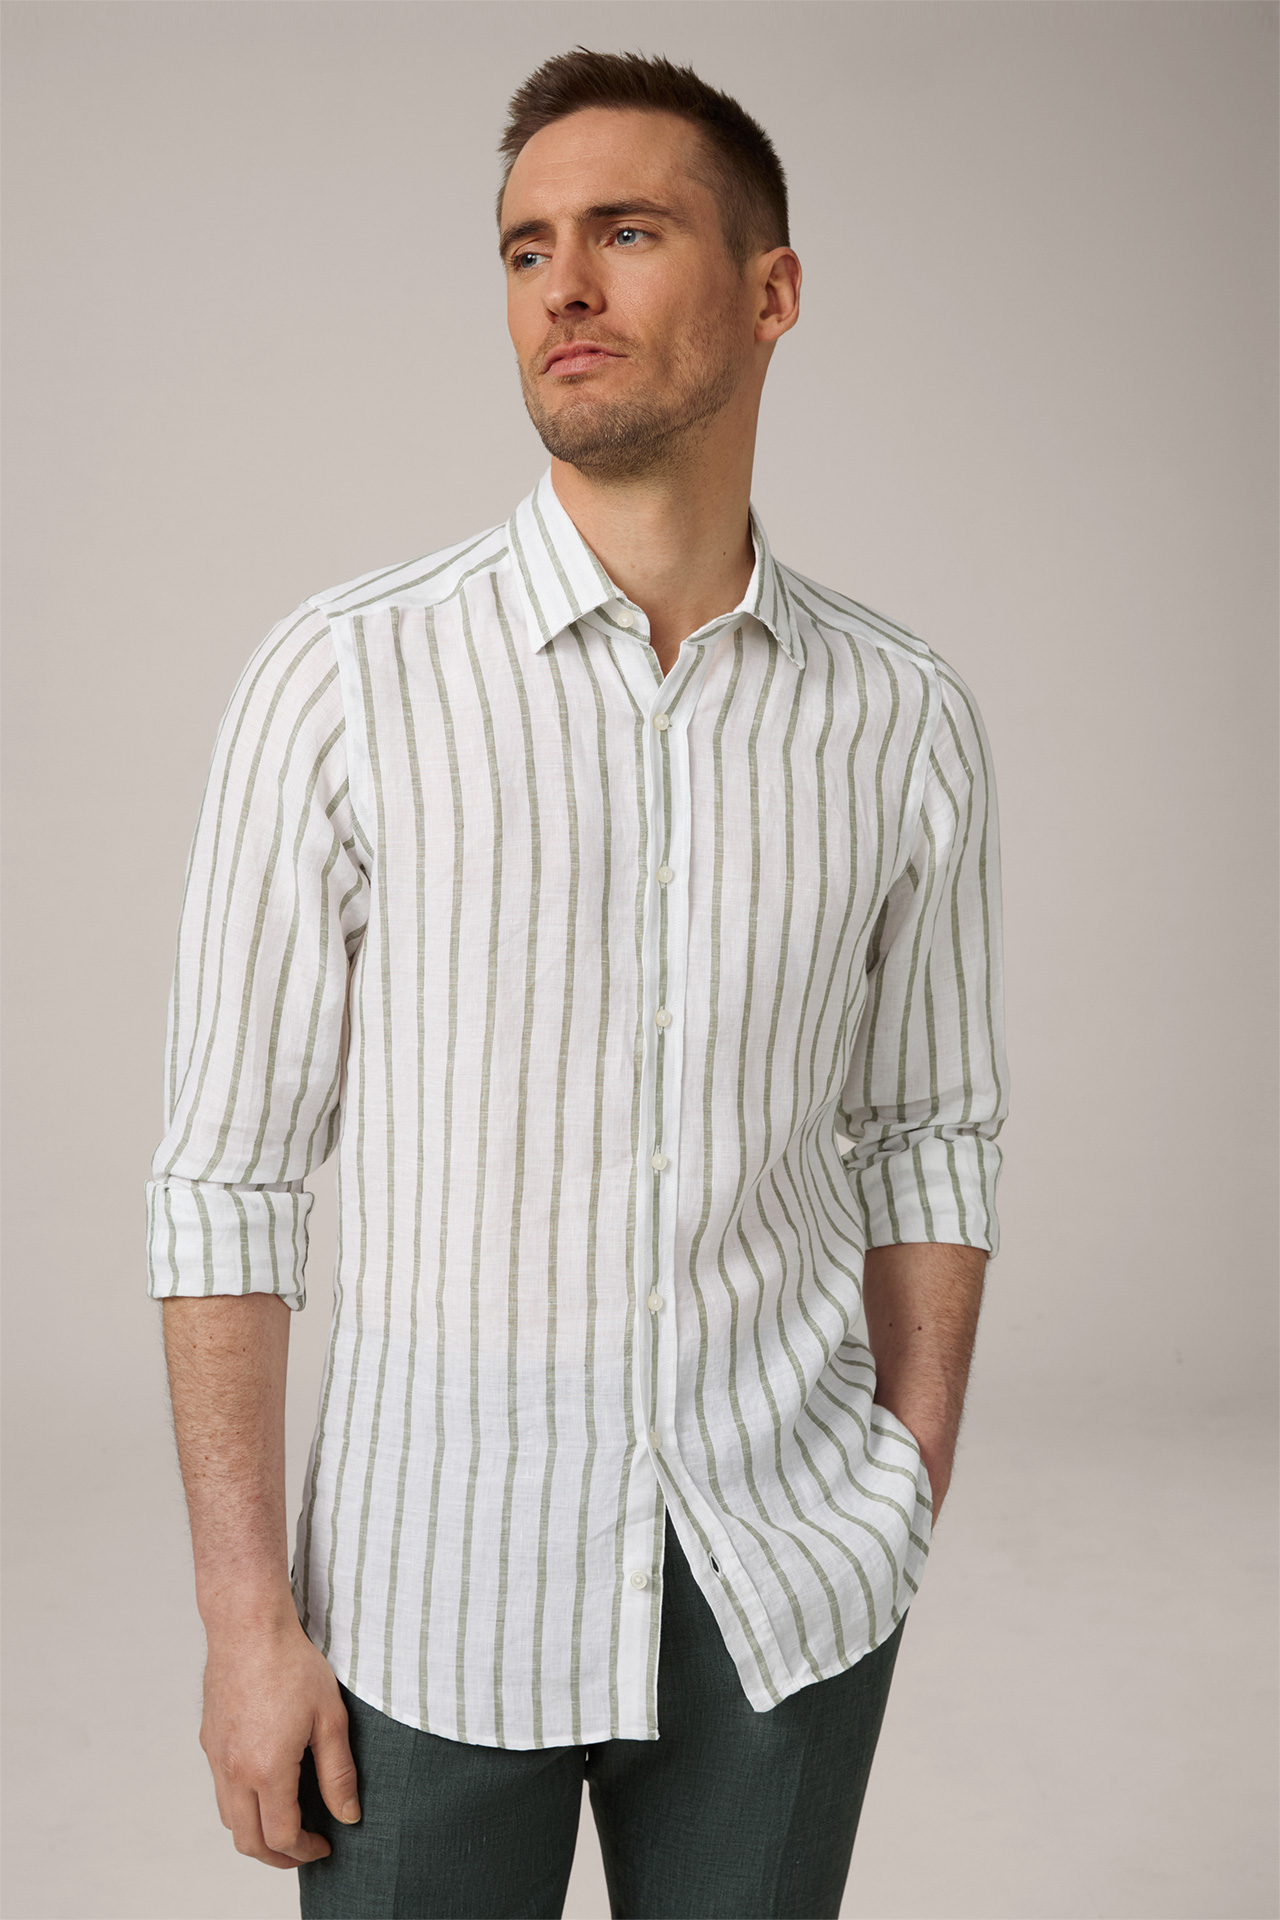 Lapo Linen Shirt in White and Olive Striped